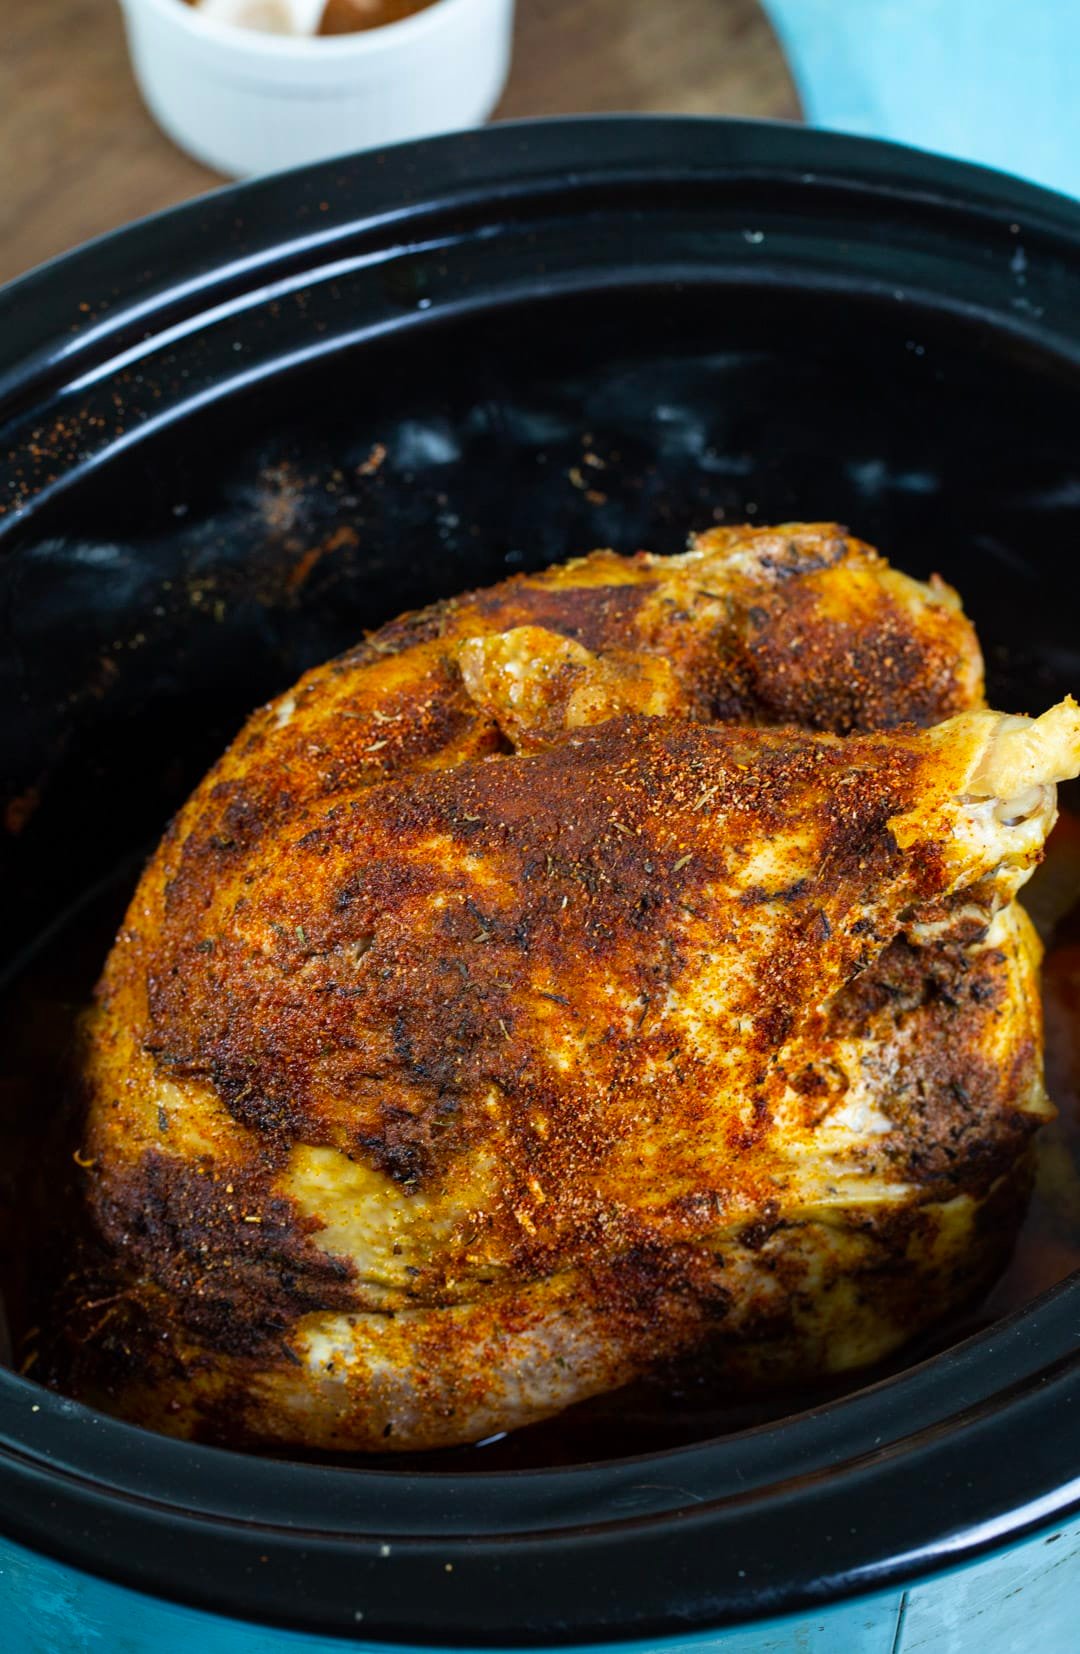 Cooked turkey breast in a slow cooker.